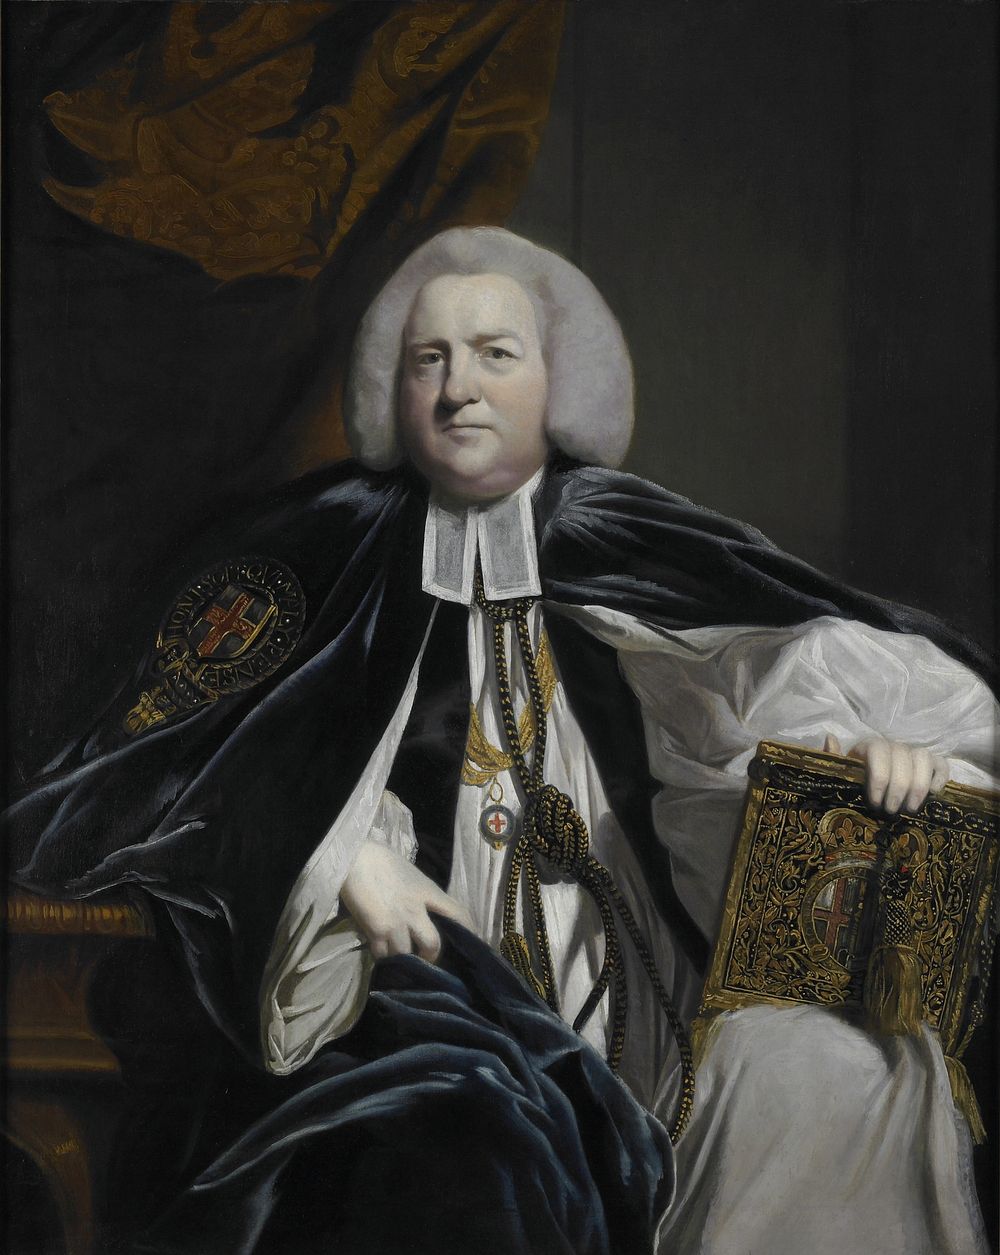 Robert Hay Drummond, D. D. Archbishop of York and Chancellor of the Order of the Garter by Sir Joshua Reynolds